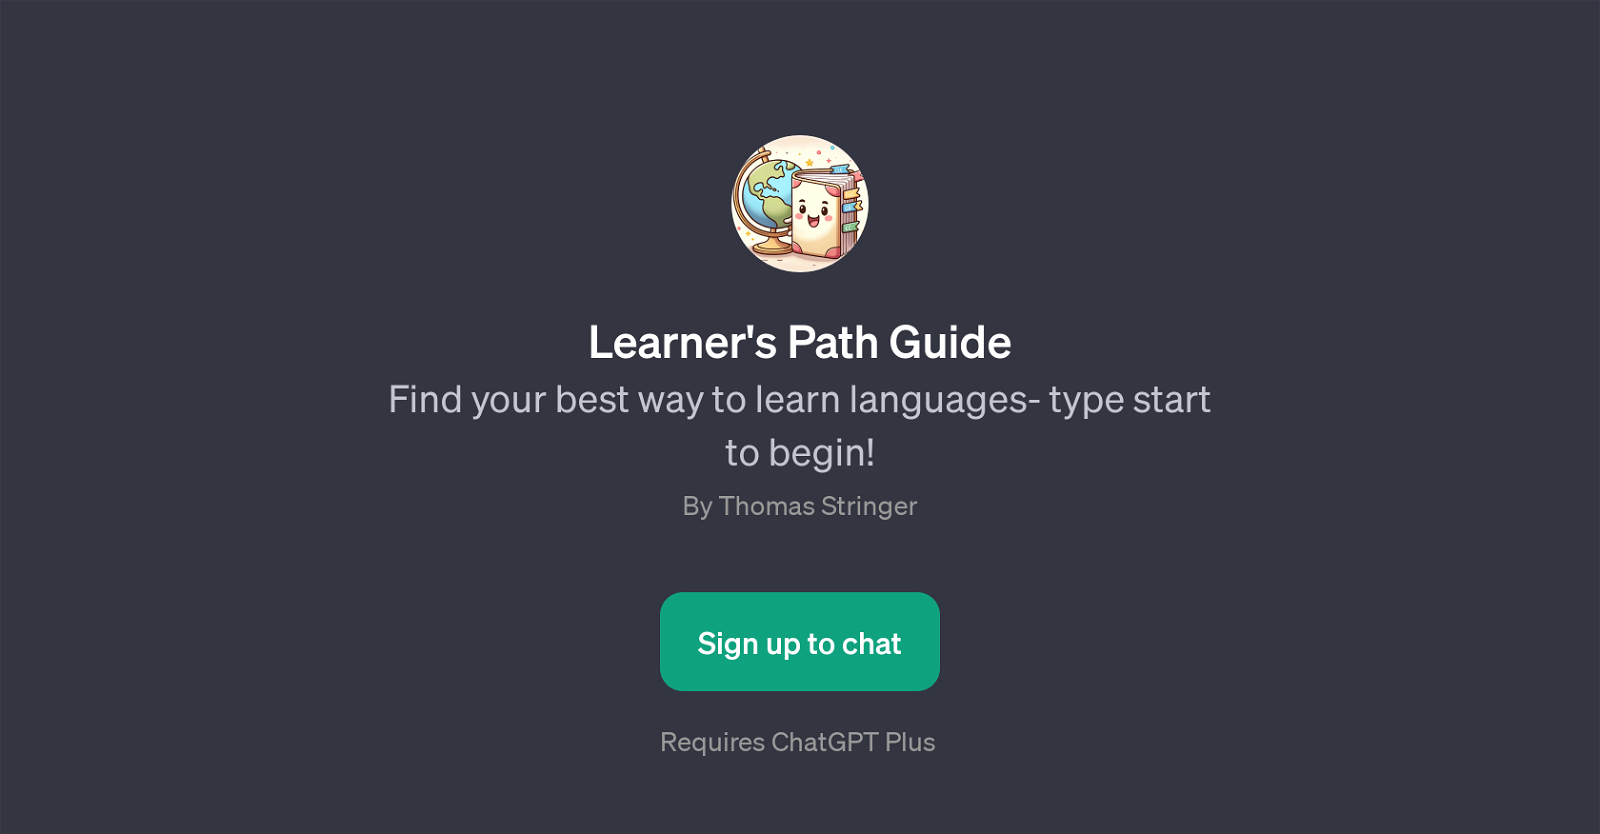 Learner's Path Guide website